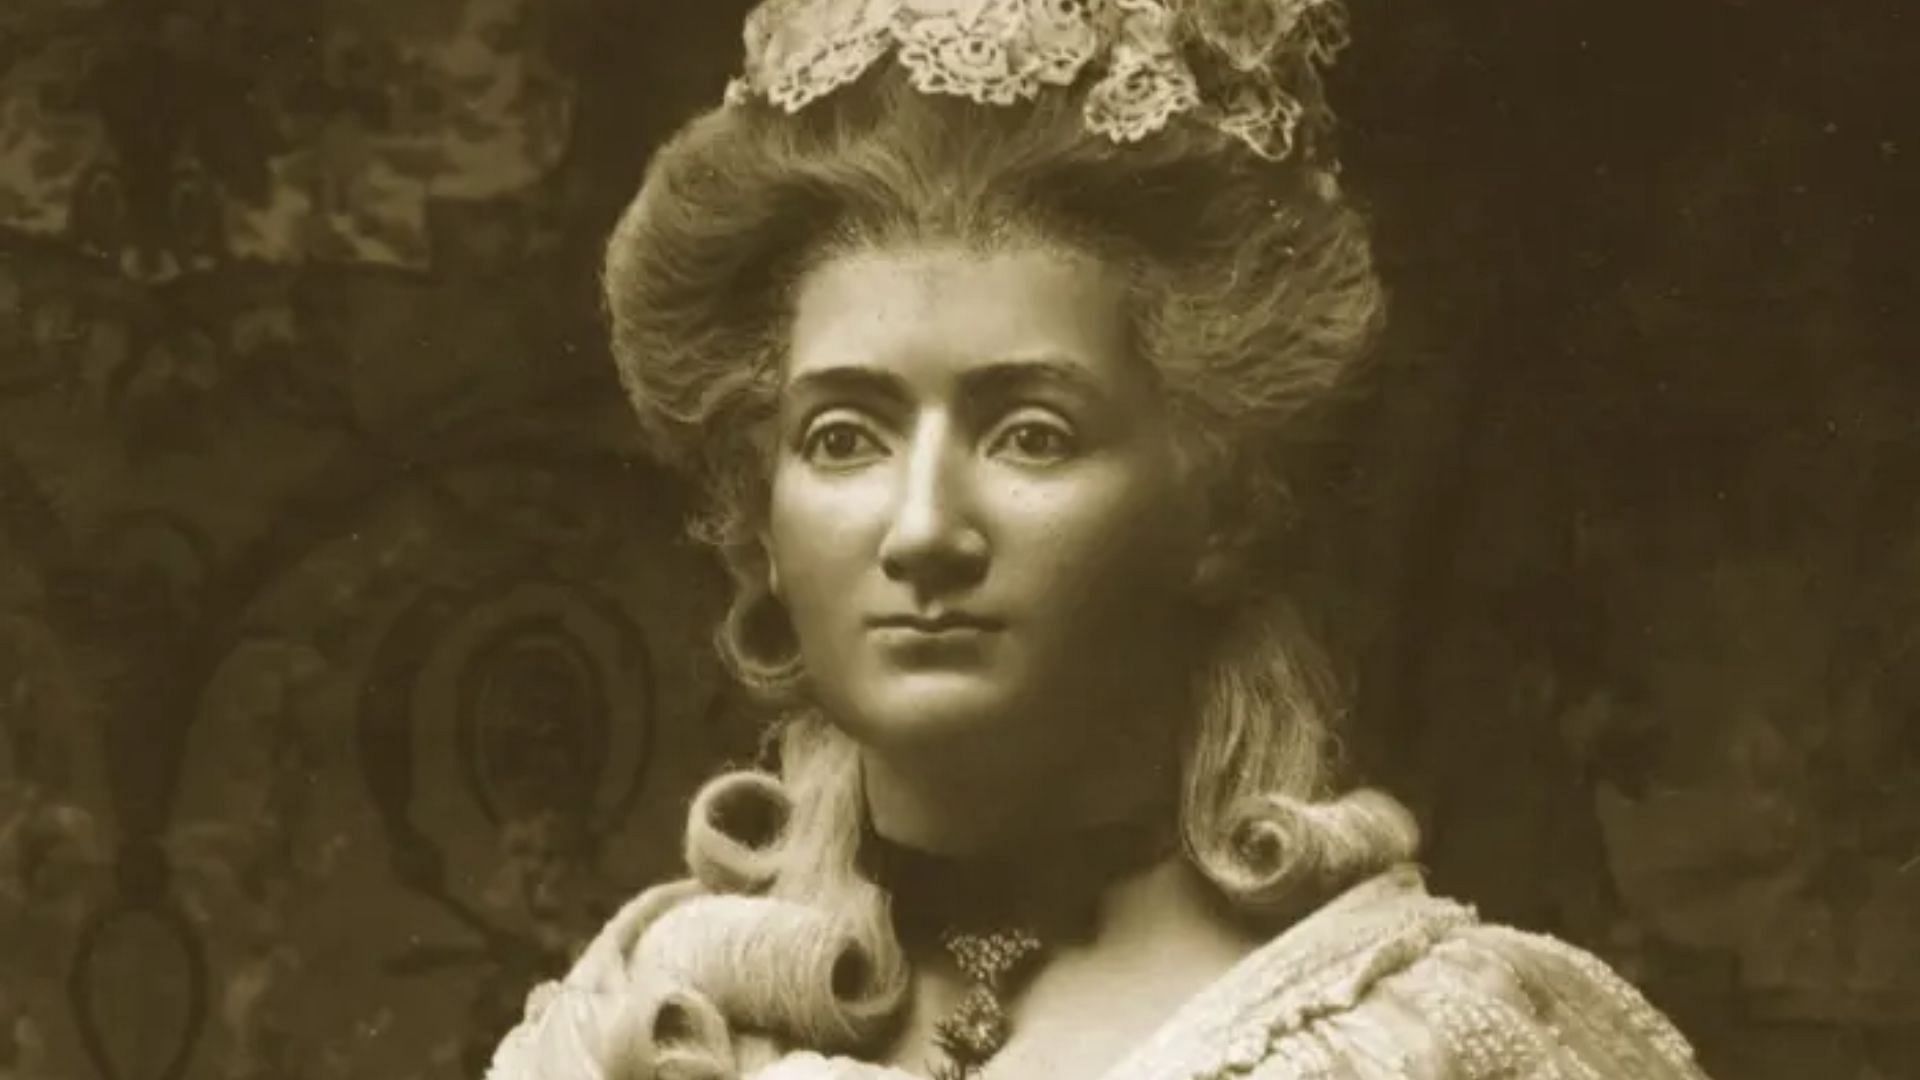 Madame Tussaud was a famous French wax modelling artist (Image via Hulton Archive/Getty Images)